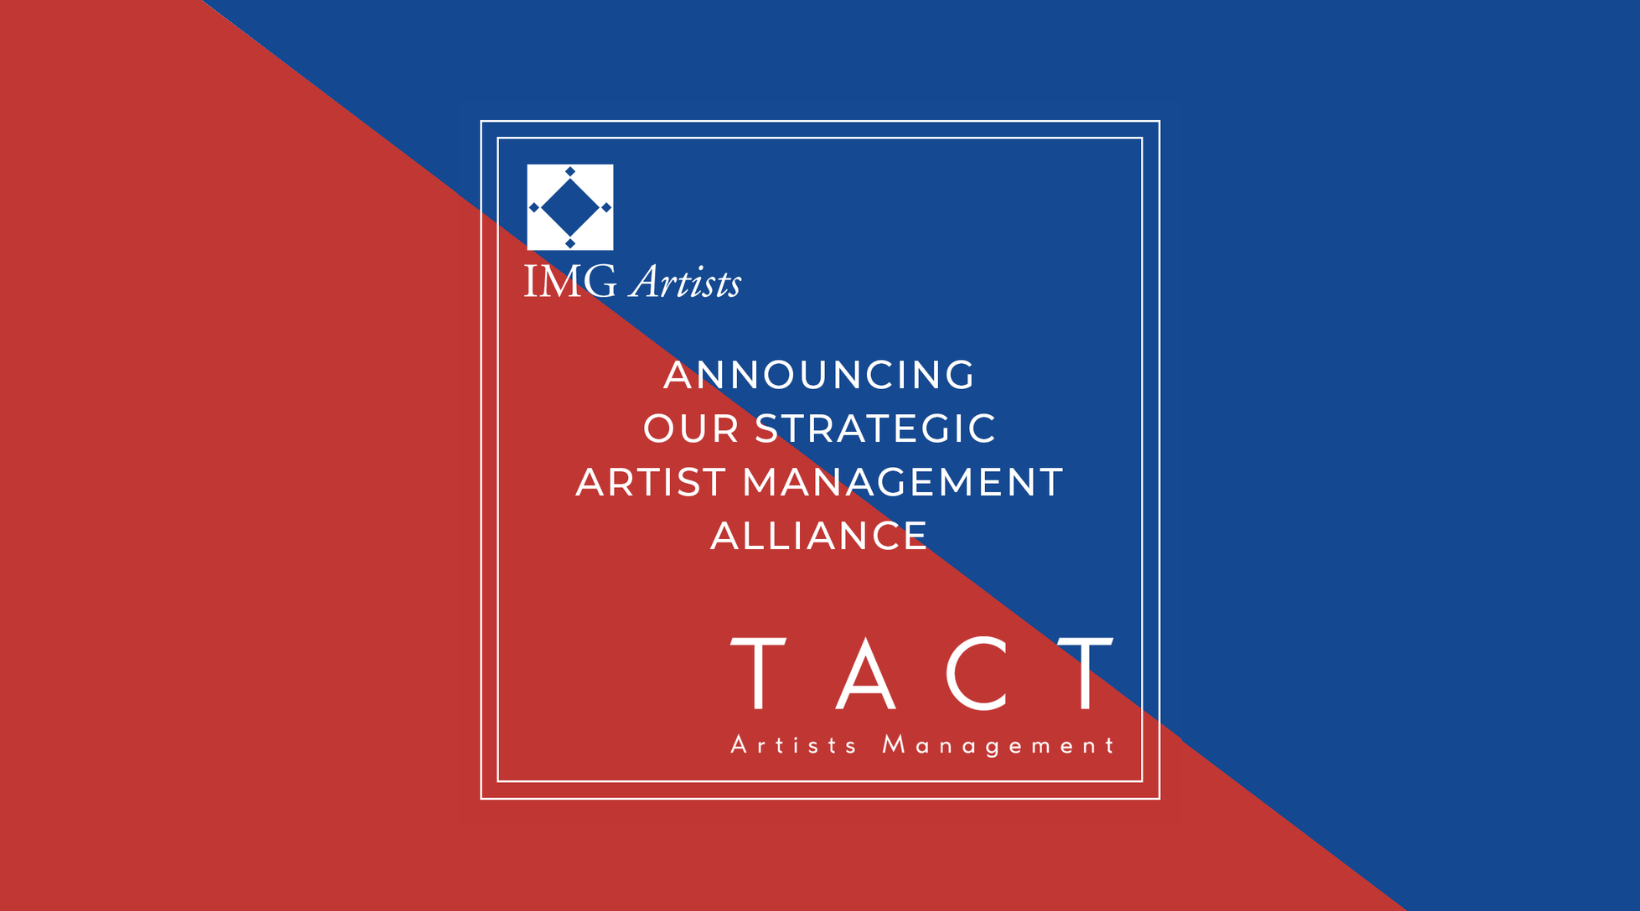 IMG Artists and TACT Artists Management announce strategic alliance